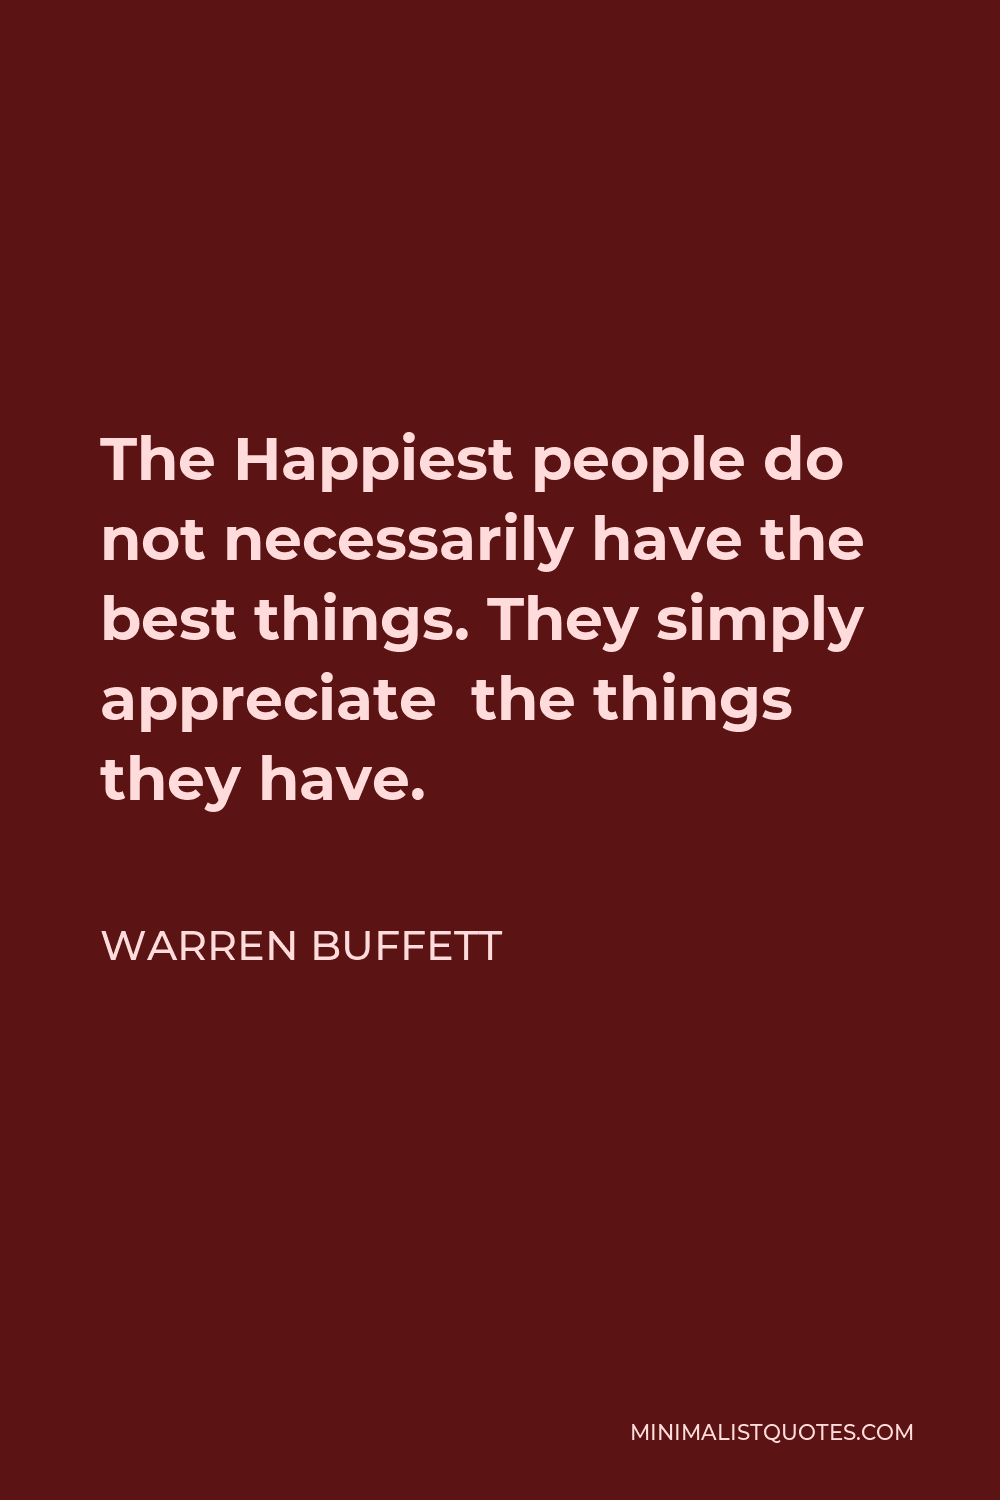 Warren Buffett Quote - The Happiest people do not necessarily have the best things. They simply appreciate the things they have.